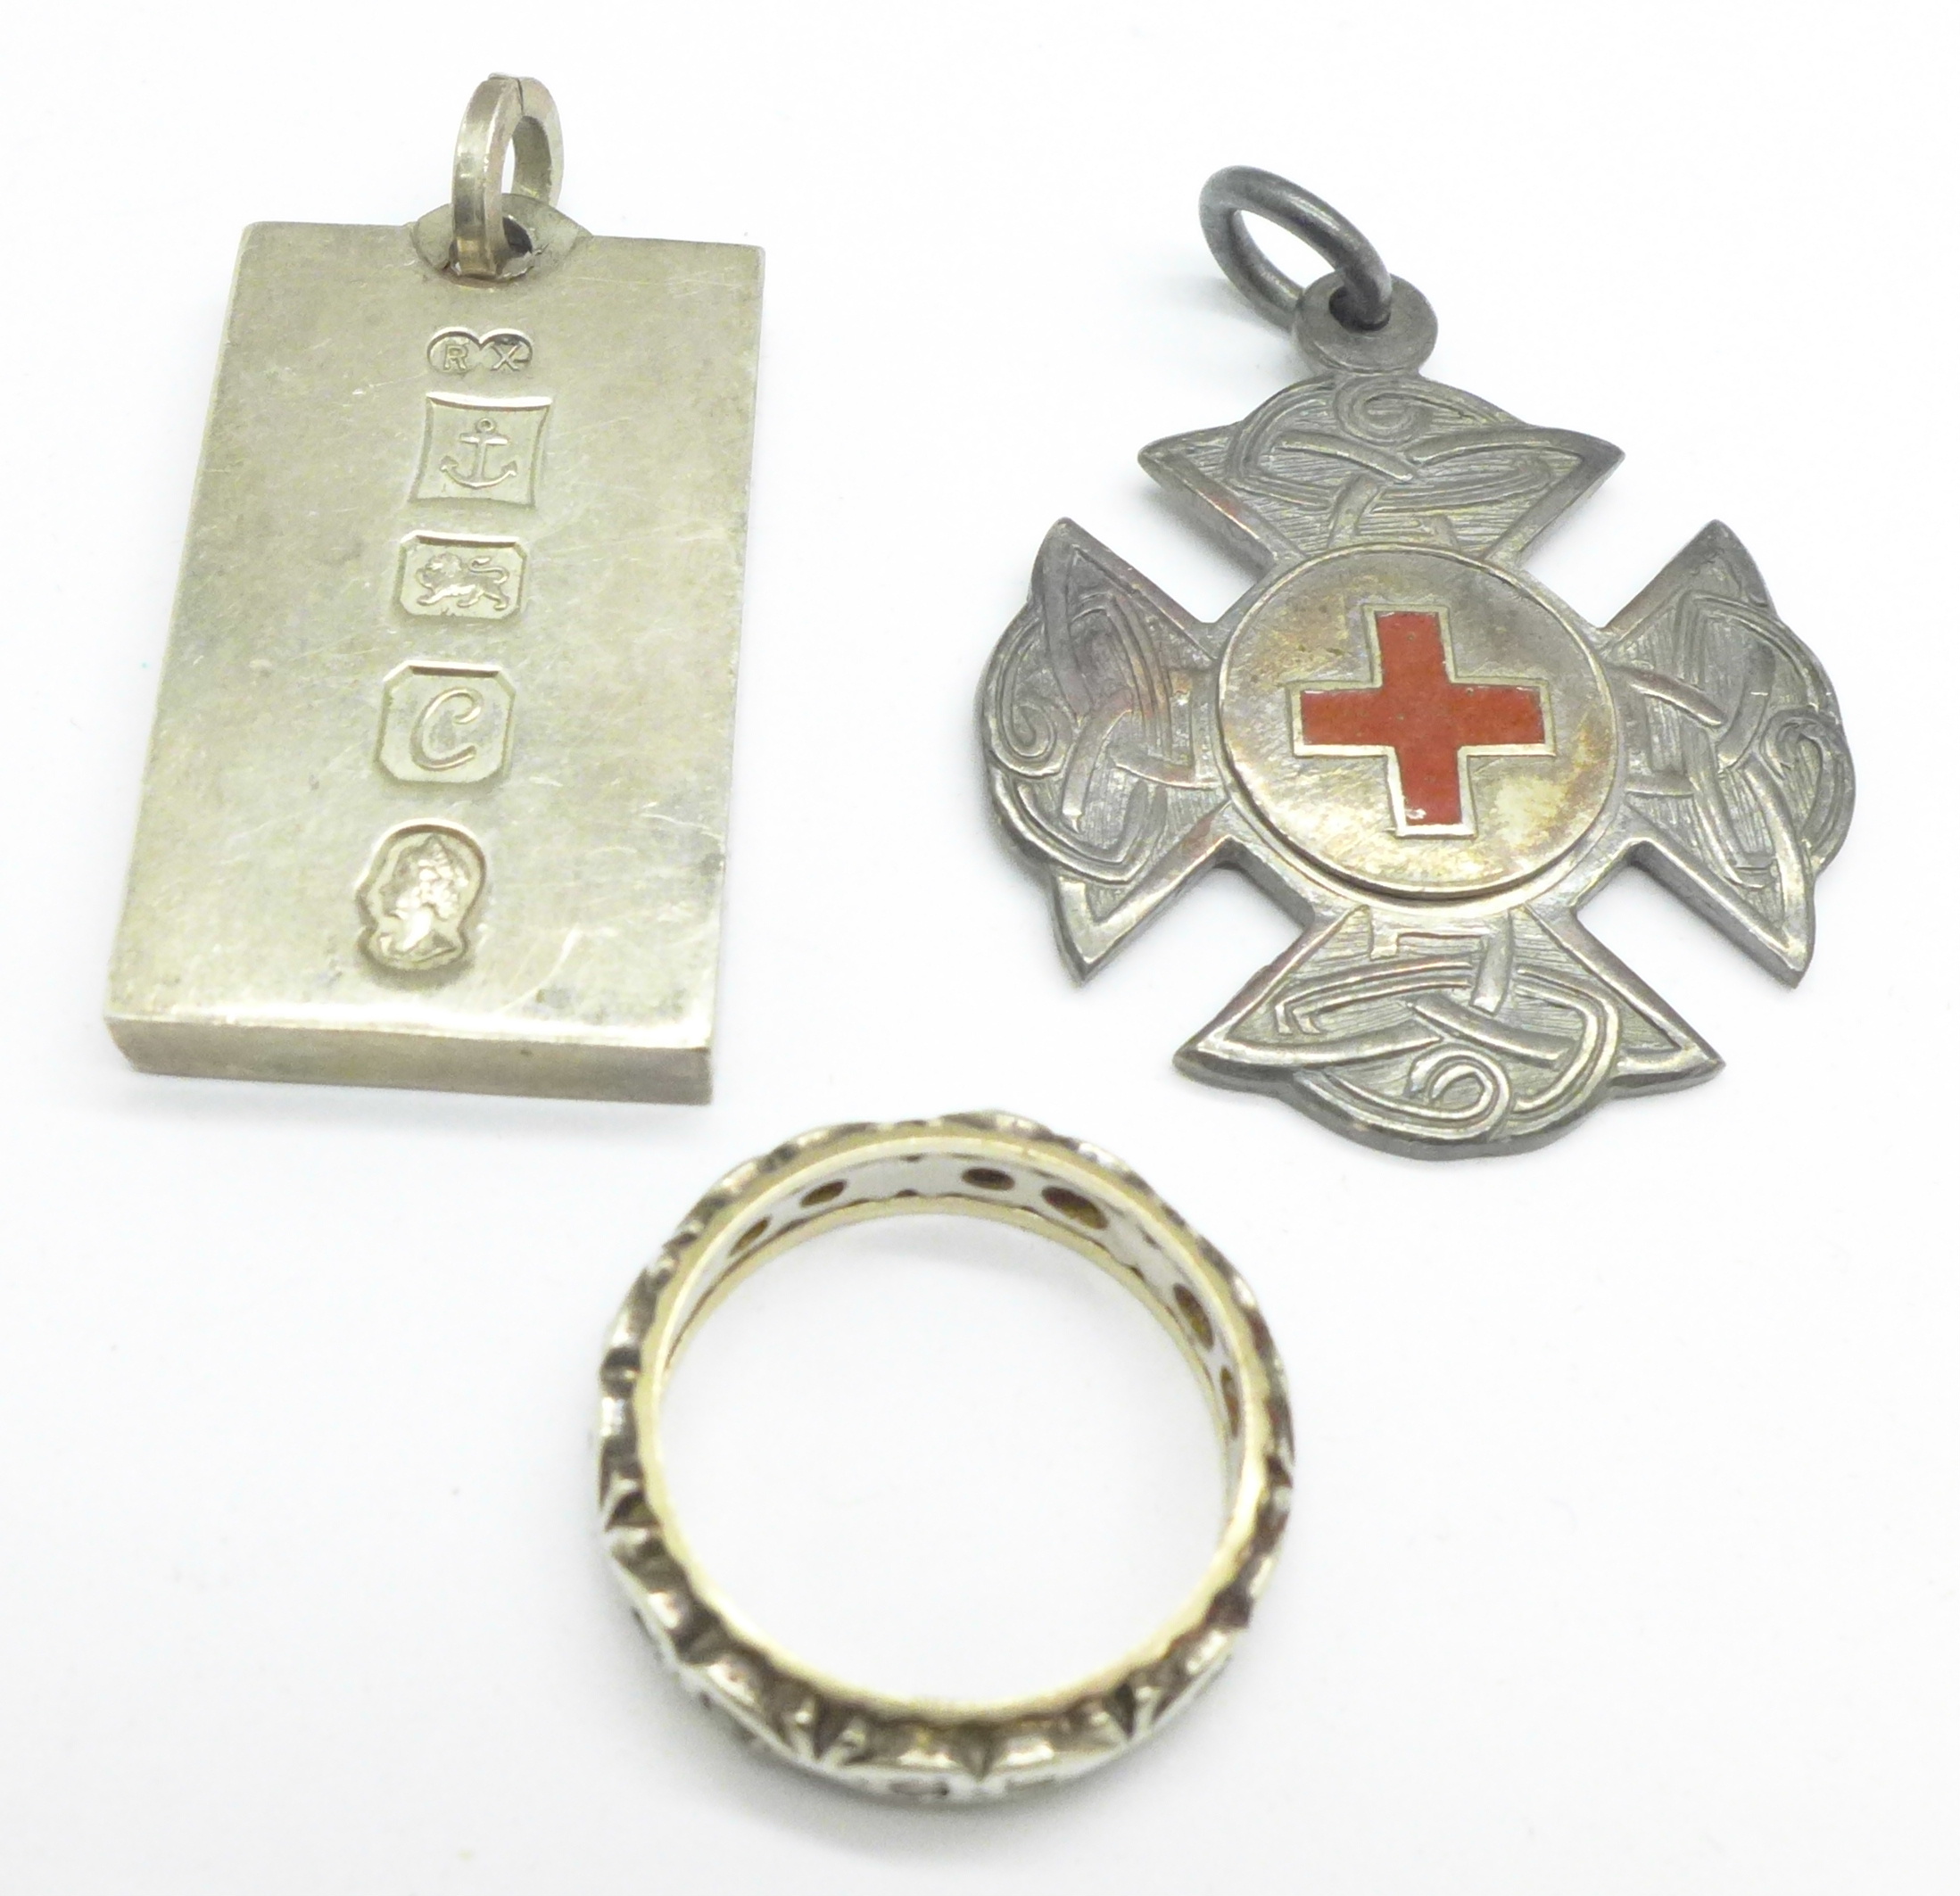 A silver ingot, silver fob and an eternity ring (tests as silver and gold), 47.4g - Image 2 of 3